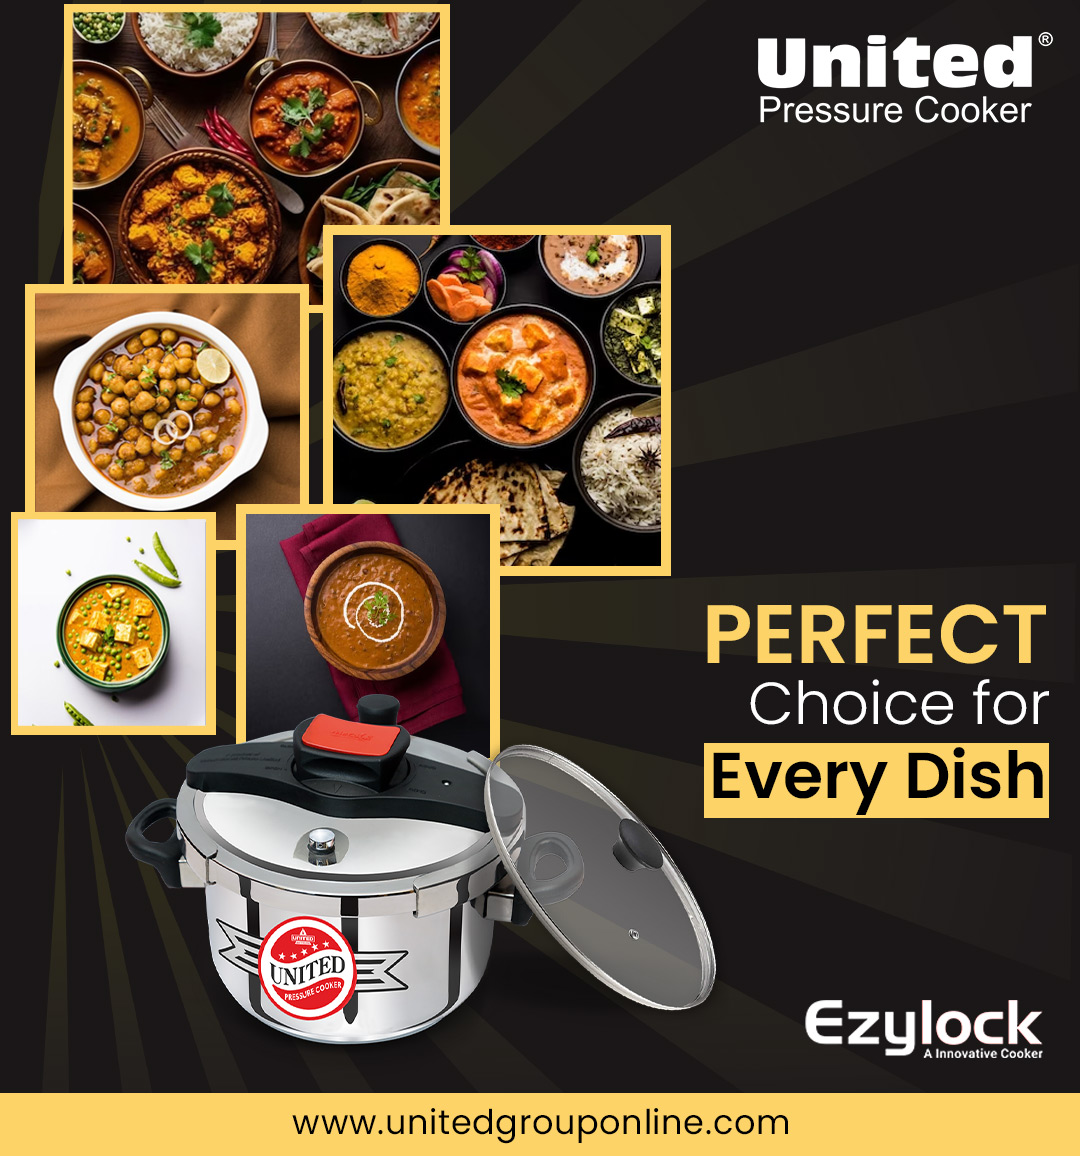 Perfect Choice For Every Dish...
.
.
.
#unitedpressurecookers #Cookers #Cookware #PressureCookers #silky #unirize #eliteplust #Ezylock #HealthyCooking #stainlesssteel
#Durable #Reliable #PremiumQuality #Tastyfood #Chefchoice
#Qualityproduct #Customersatisfaction